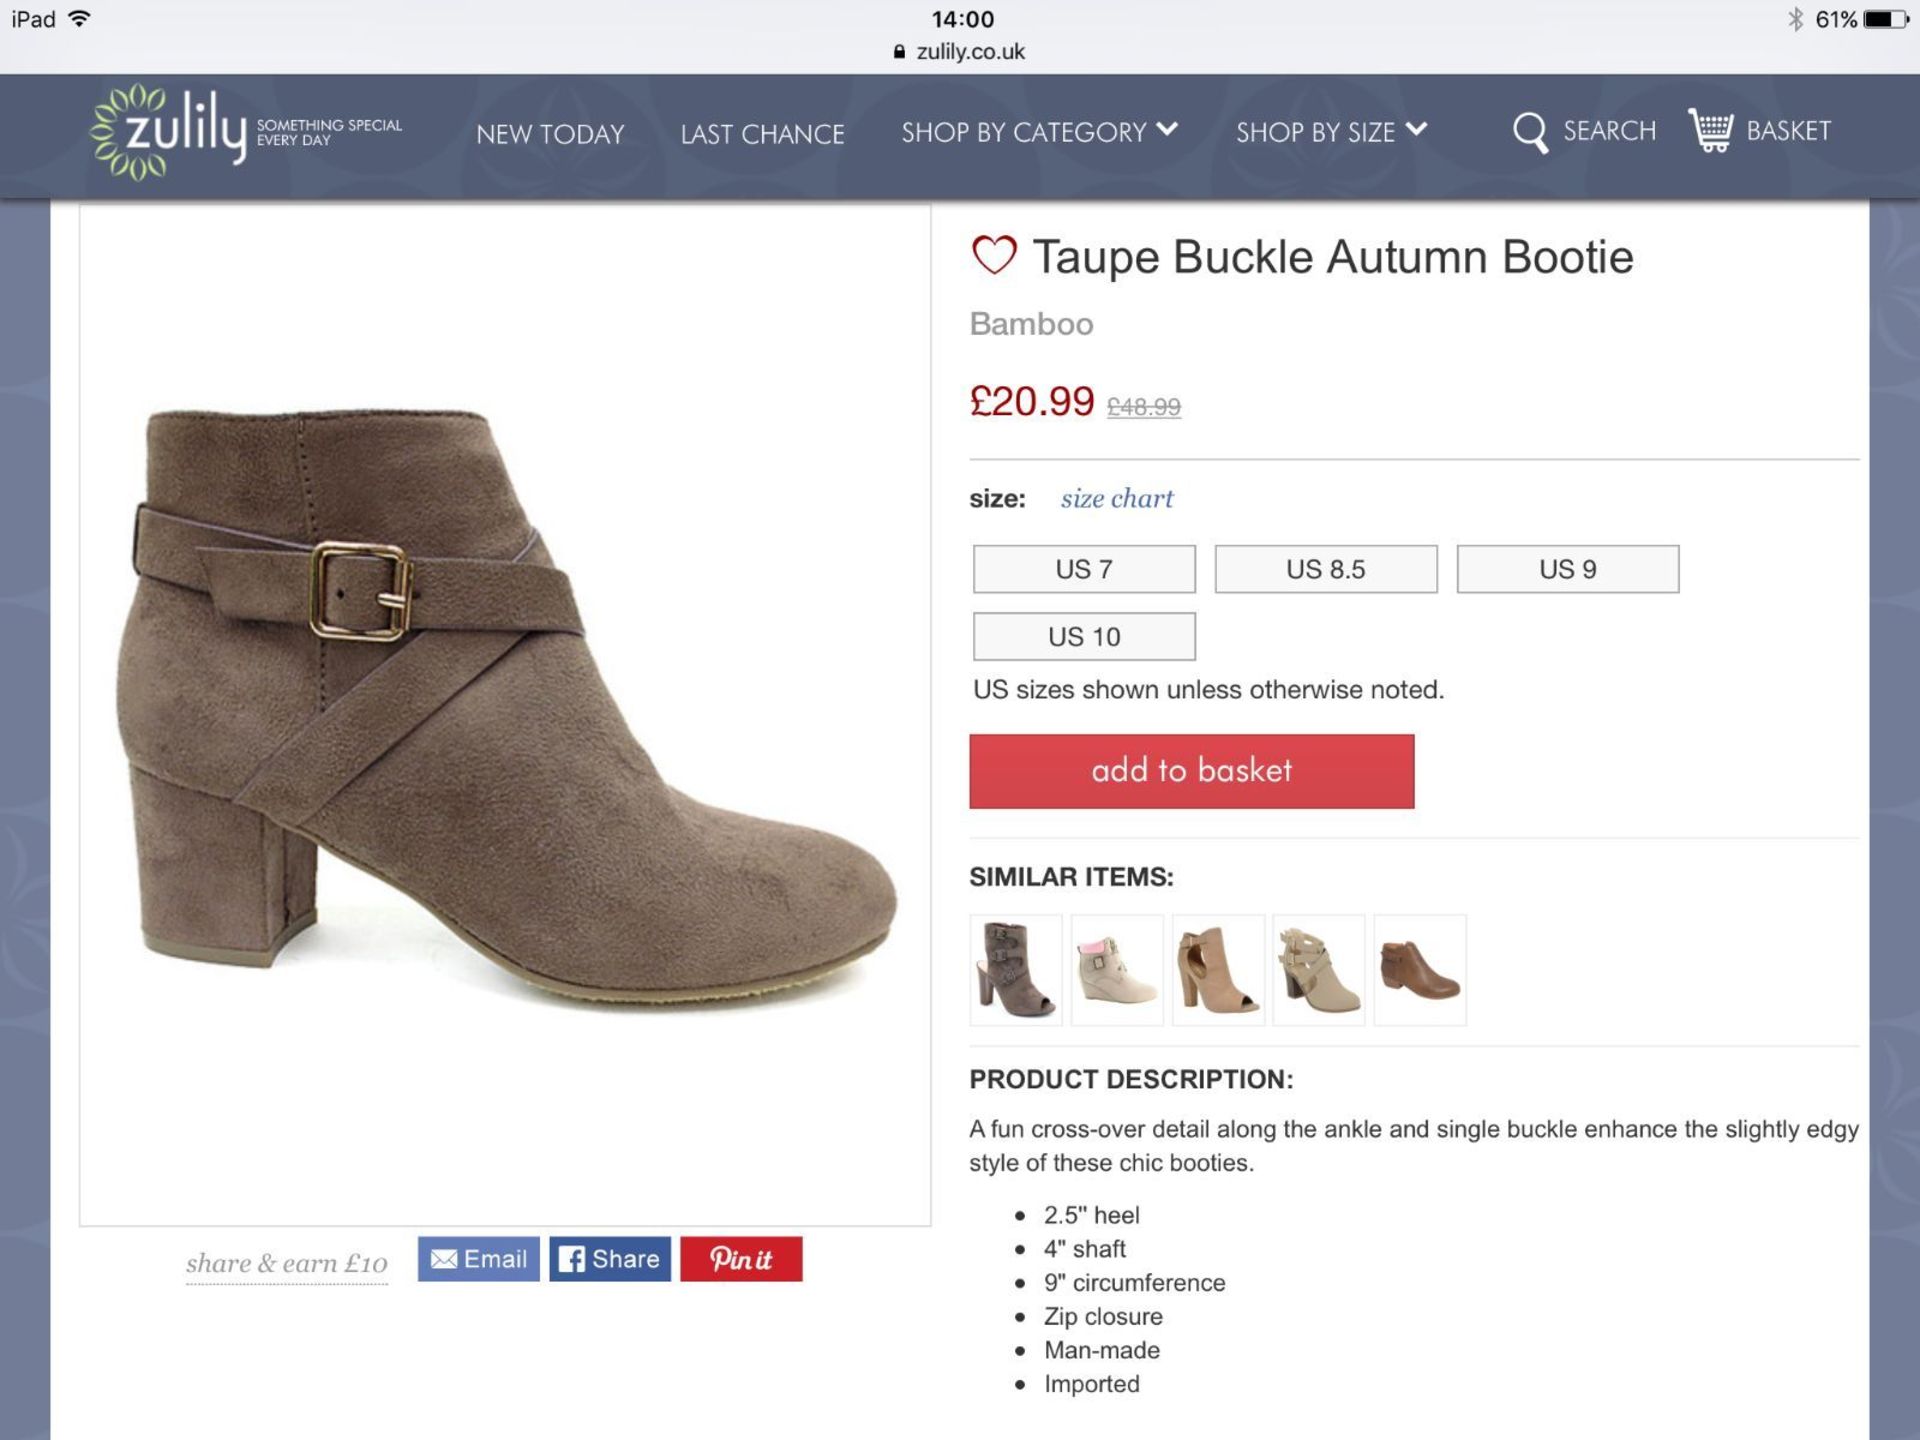 Bamboo Taupe Buckle Autumn Bootie, Size Eur 36, RRP £48.99 (New with box) [Ref: ] - Image 2 of 2